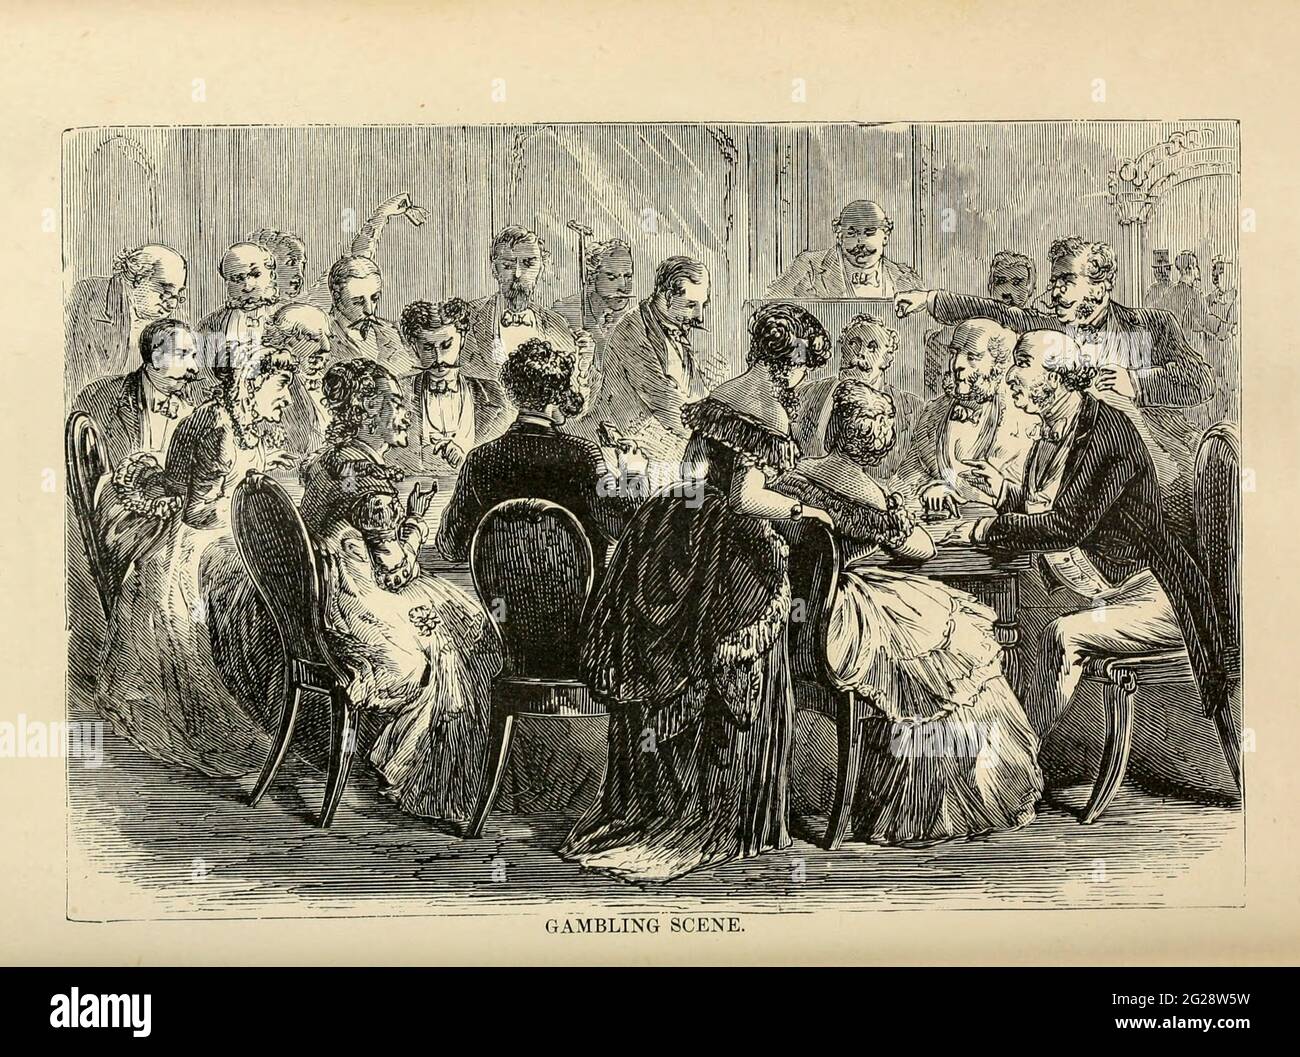 Gambling Scene from the book Sights and sensations in Europe : sketches of travel and adventure in England, Ireland, France, Spain, Portugal, Germany, Switzerland, Italy, Austria, Poland, Hungary, Holland, and Belgium : with an account of the places and persons prominent in the Franco-German war by Browne, Junius Henri, 1833-1902 Published by Hartford, Conn. : American Pub. Co. ; San Francisco, in 1871 Stock Photo